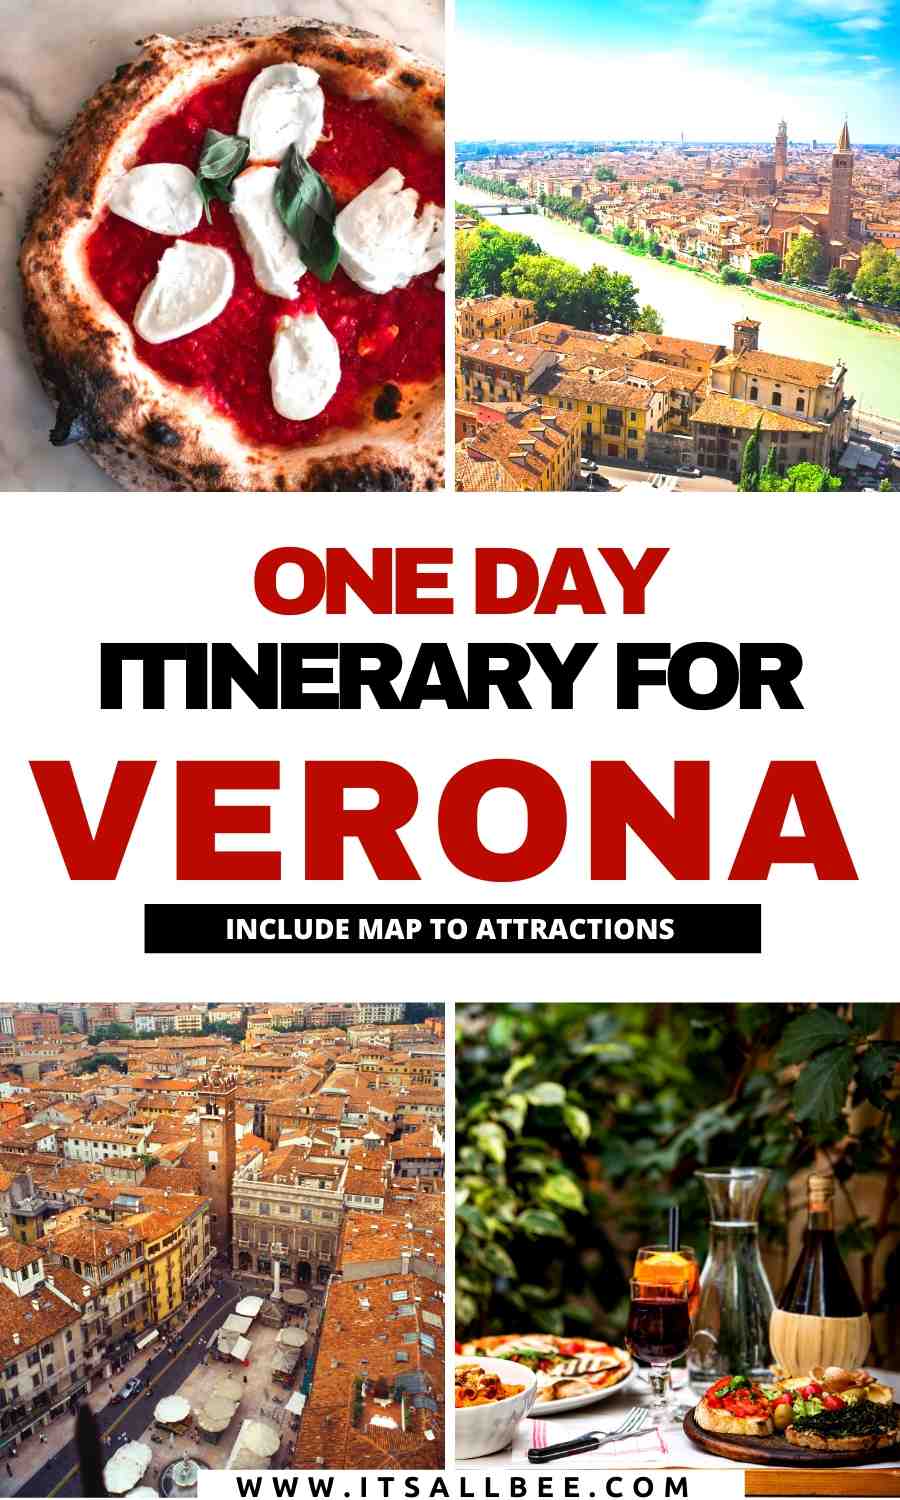 The Perfect One Day Verona Itinerary - things to do in verona in one day